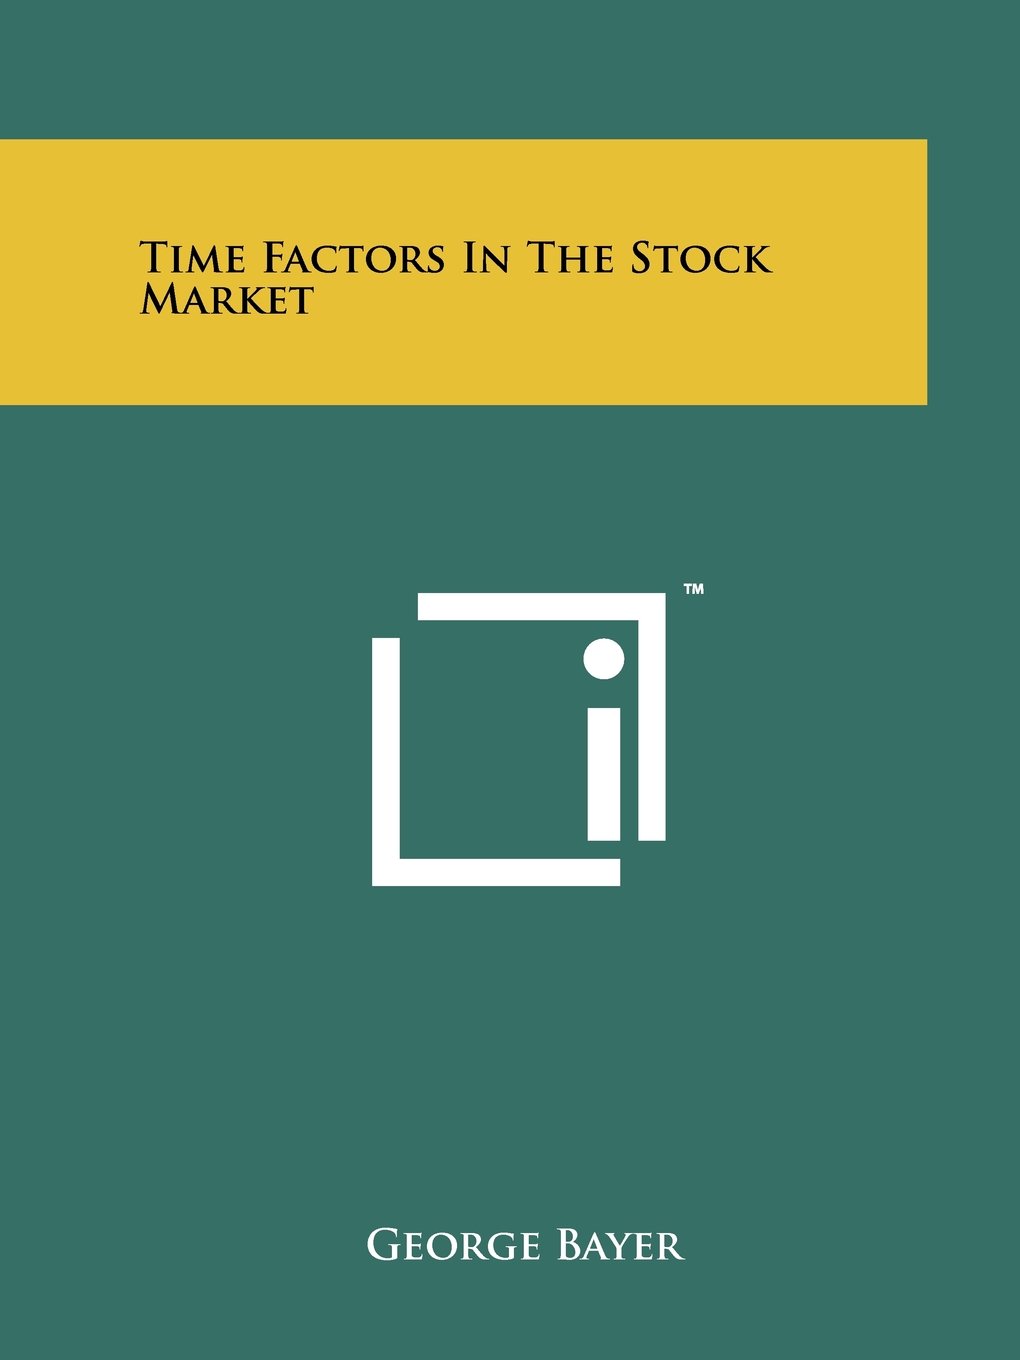 George Bayer - Time Factors in the Stock Market